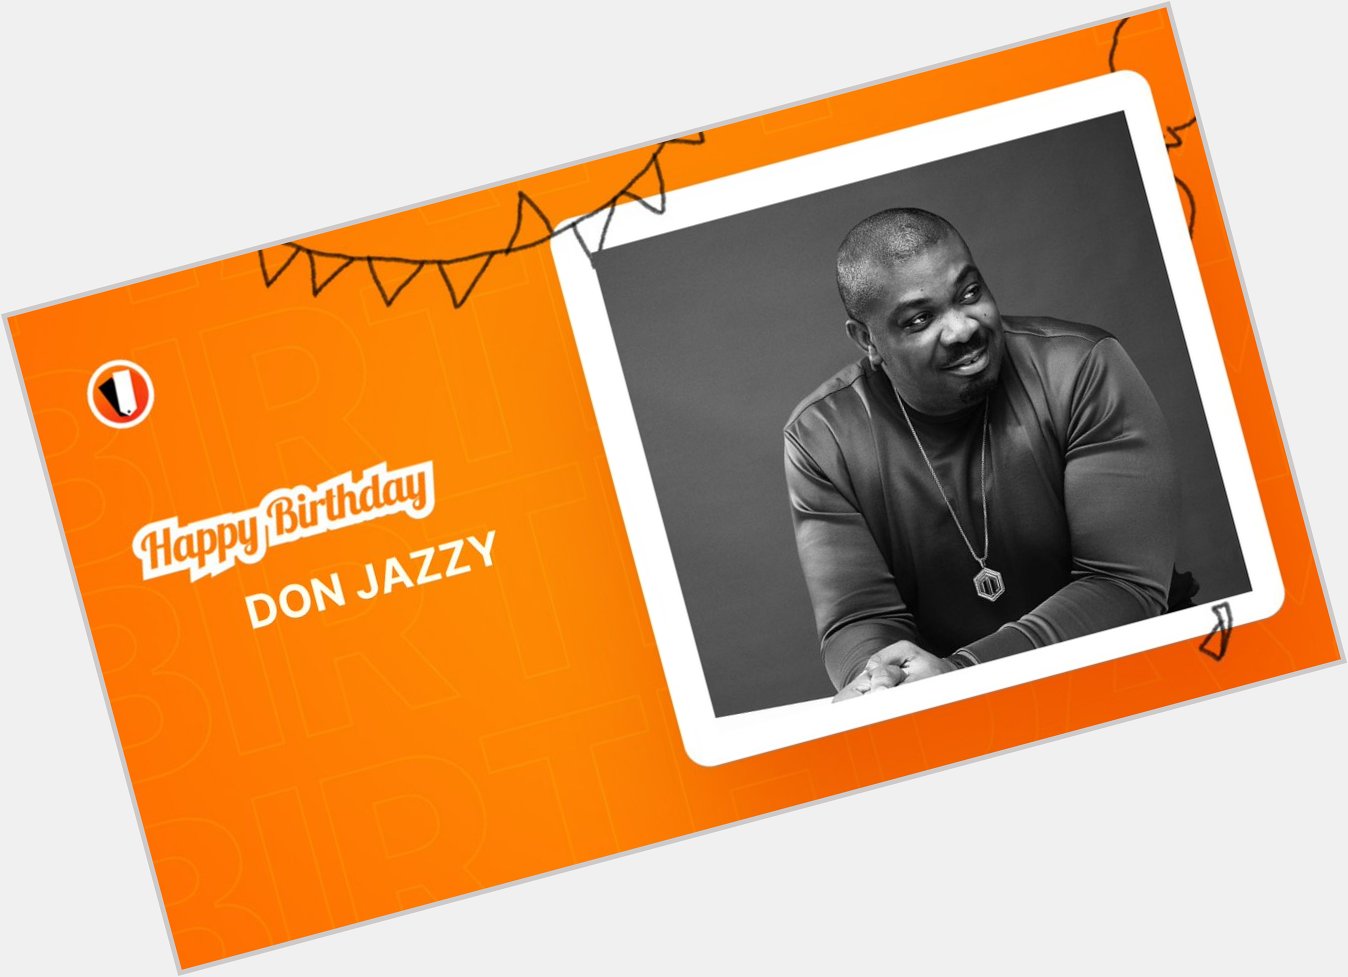 Happy Birthday to Music Producer, Singer and Songwriter, Don Jazzy! Sending Love and Light your way! 